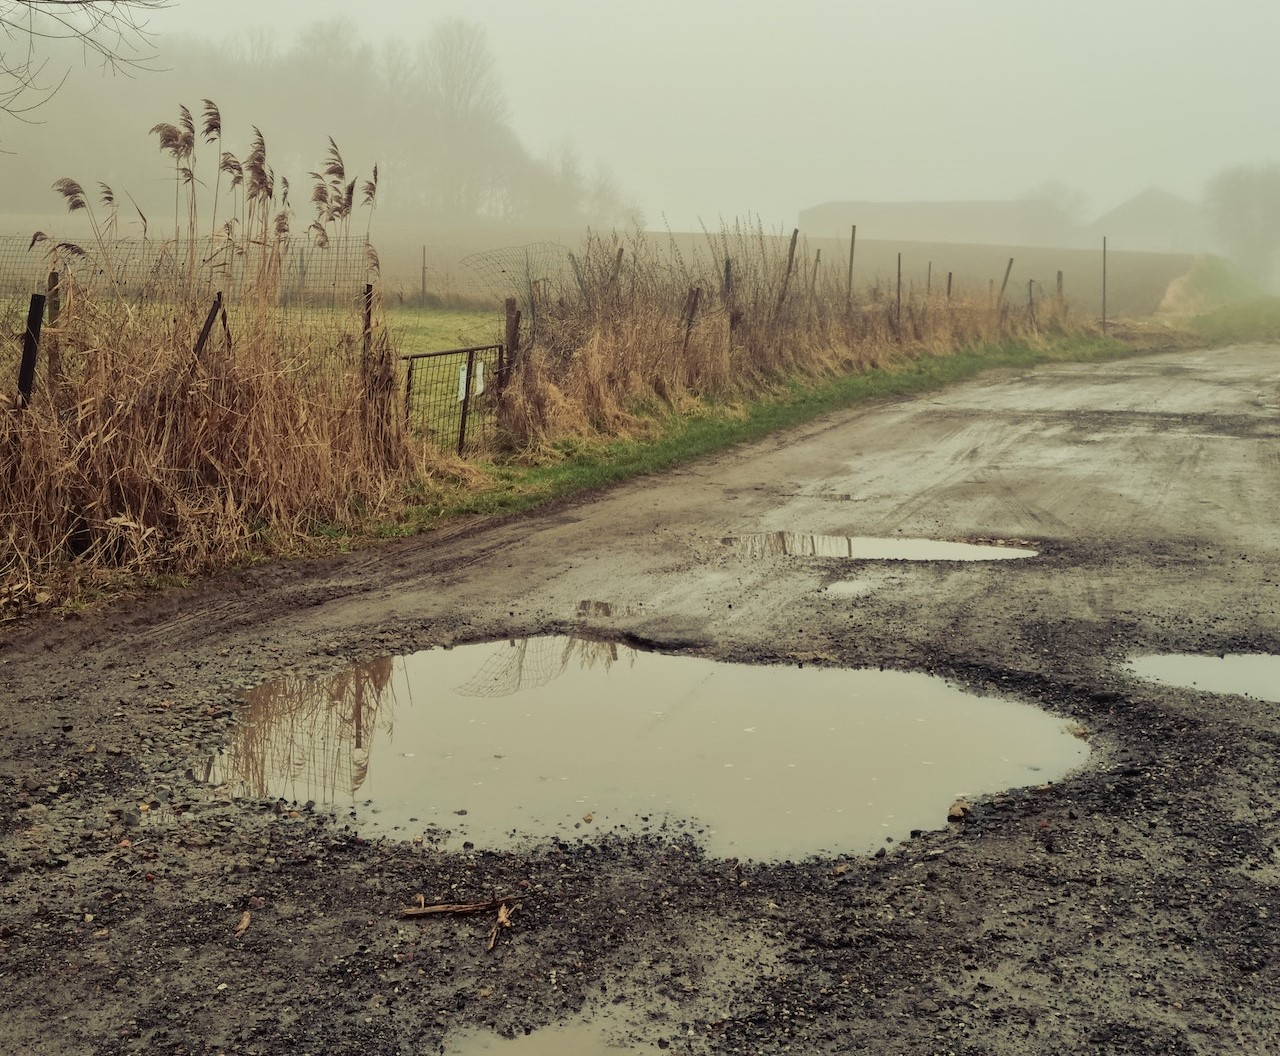 A puddle in a large pothole on a country road